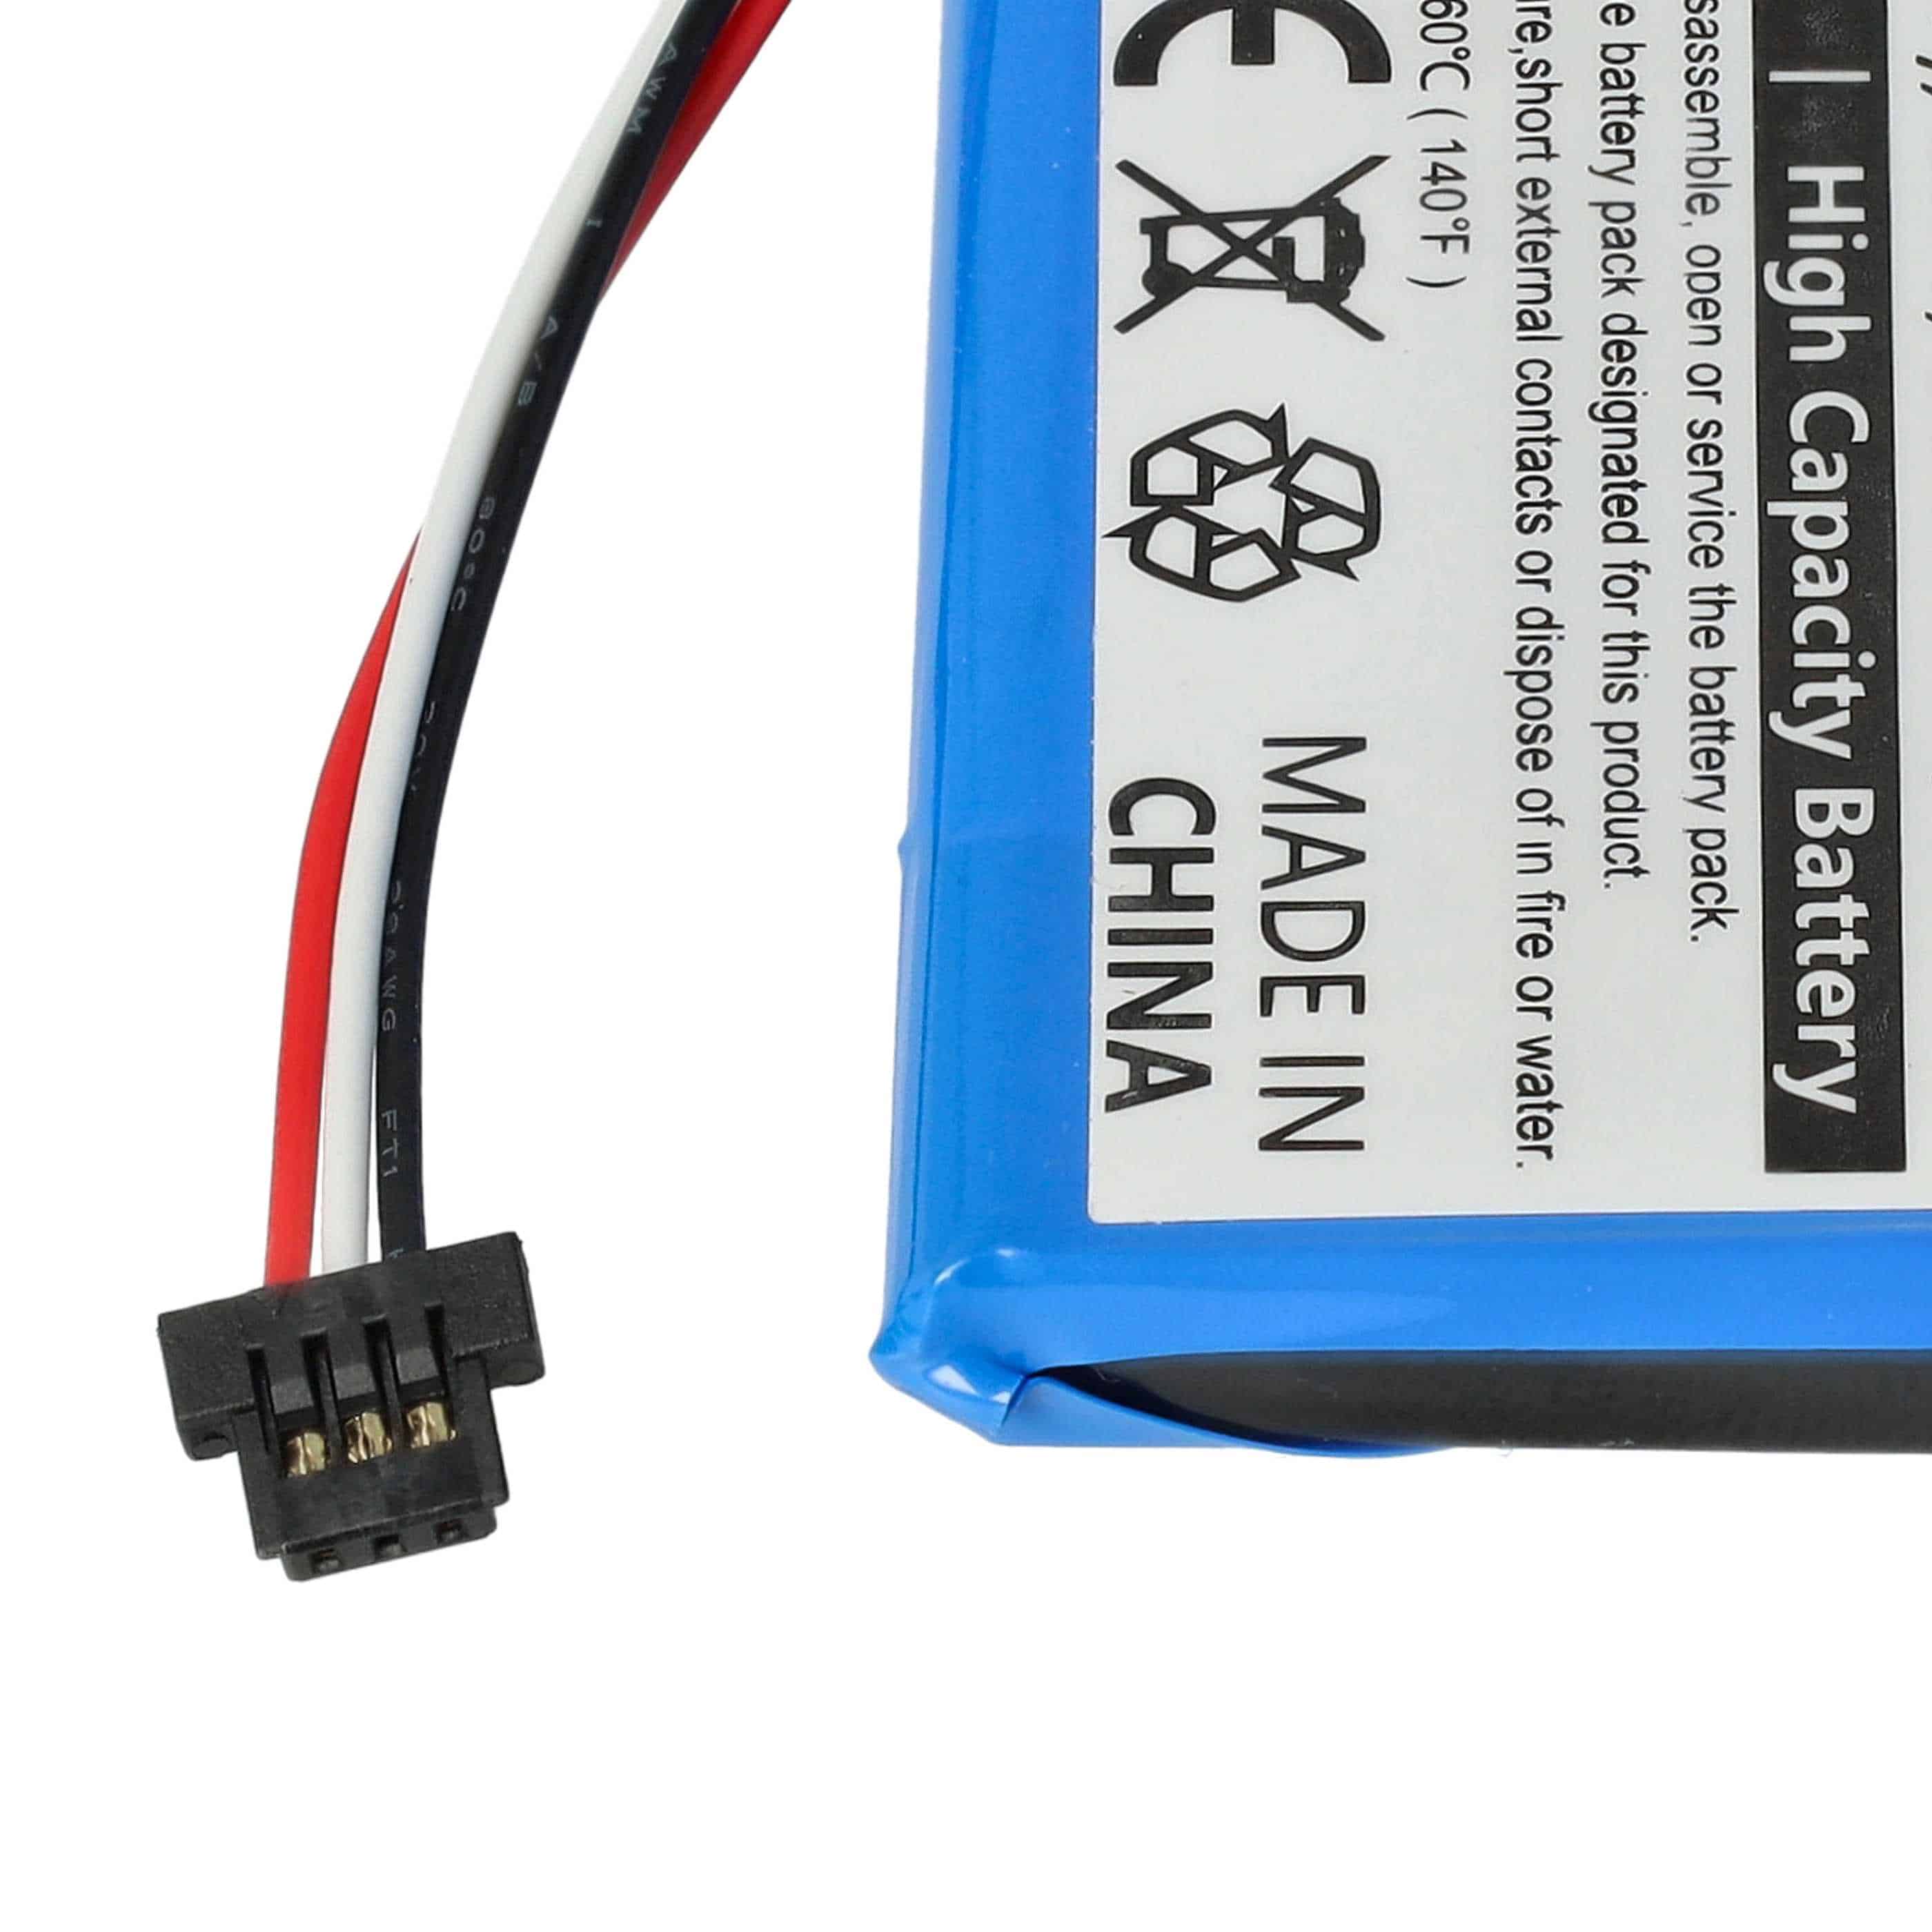 GPS Battery Replacement for TomTom ICP553450, AHA11111009, 1ICP6//34/50 - 1200mAh, 3.7V